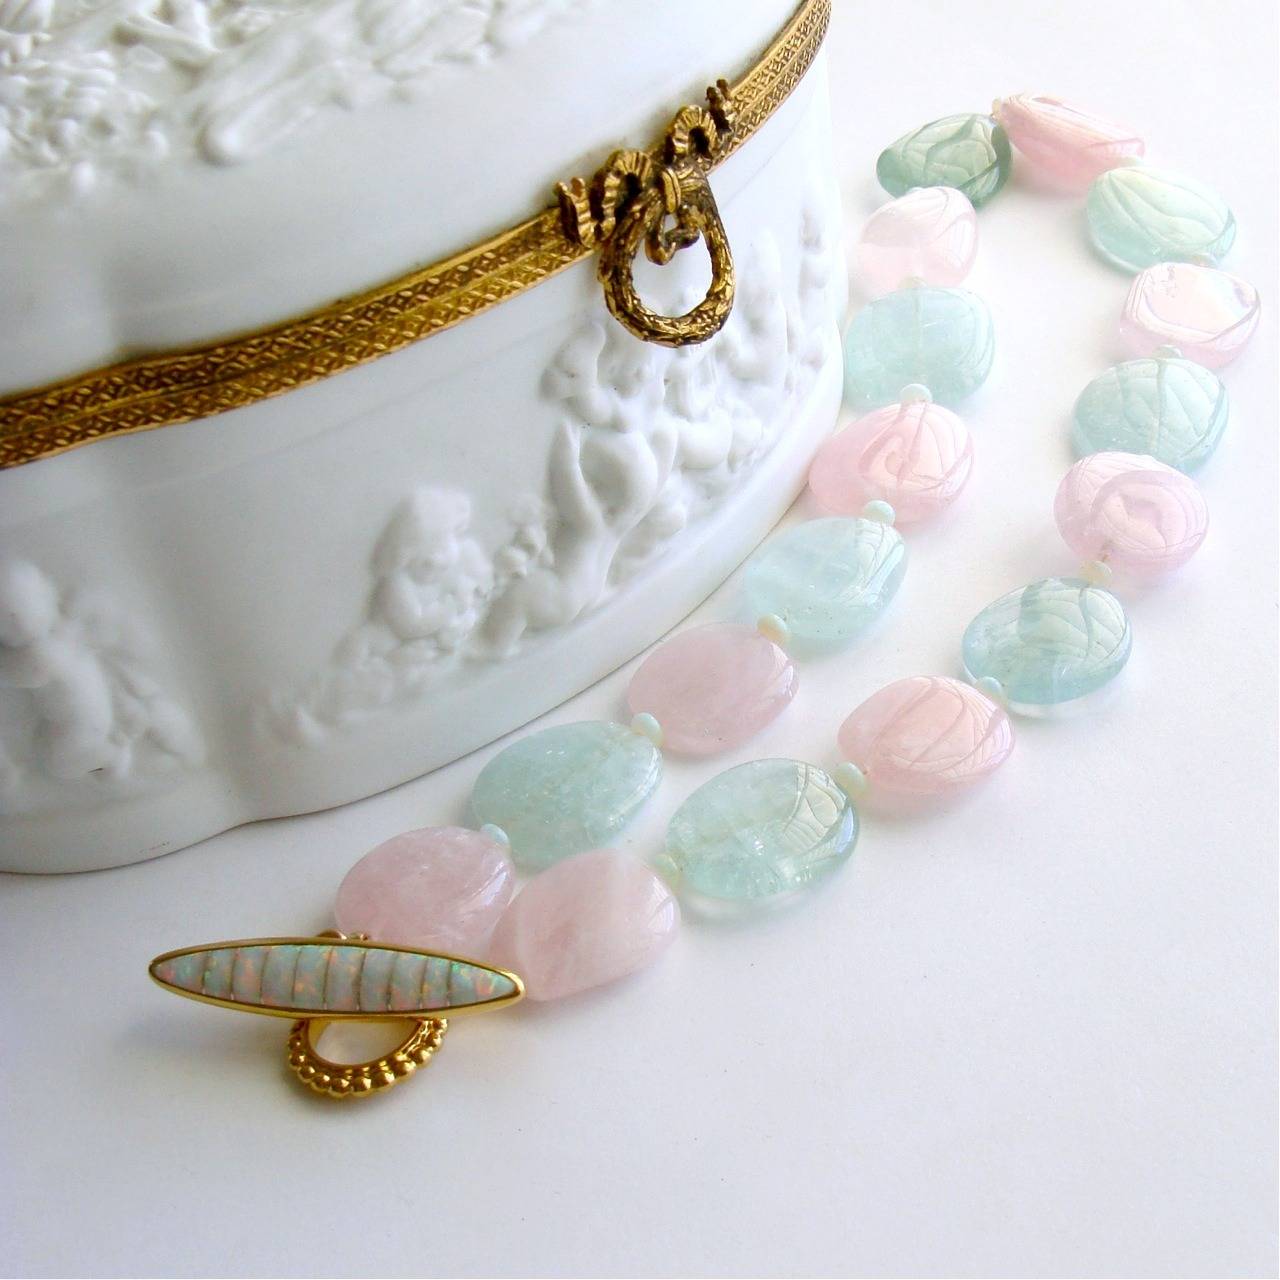 Francesca Necklace.

After such a harsh winter, spring is on the minds of fashionistas everywhere and this confectionary colored necklace does not disappoint!  Beryl is a gemstone family name that include stones in many colors - aquamarine (soft